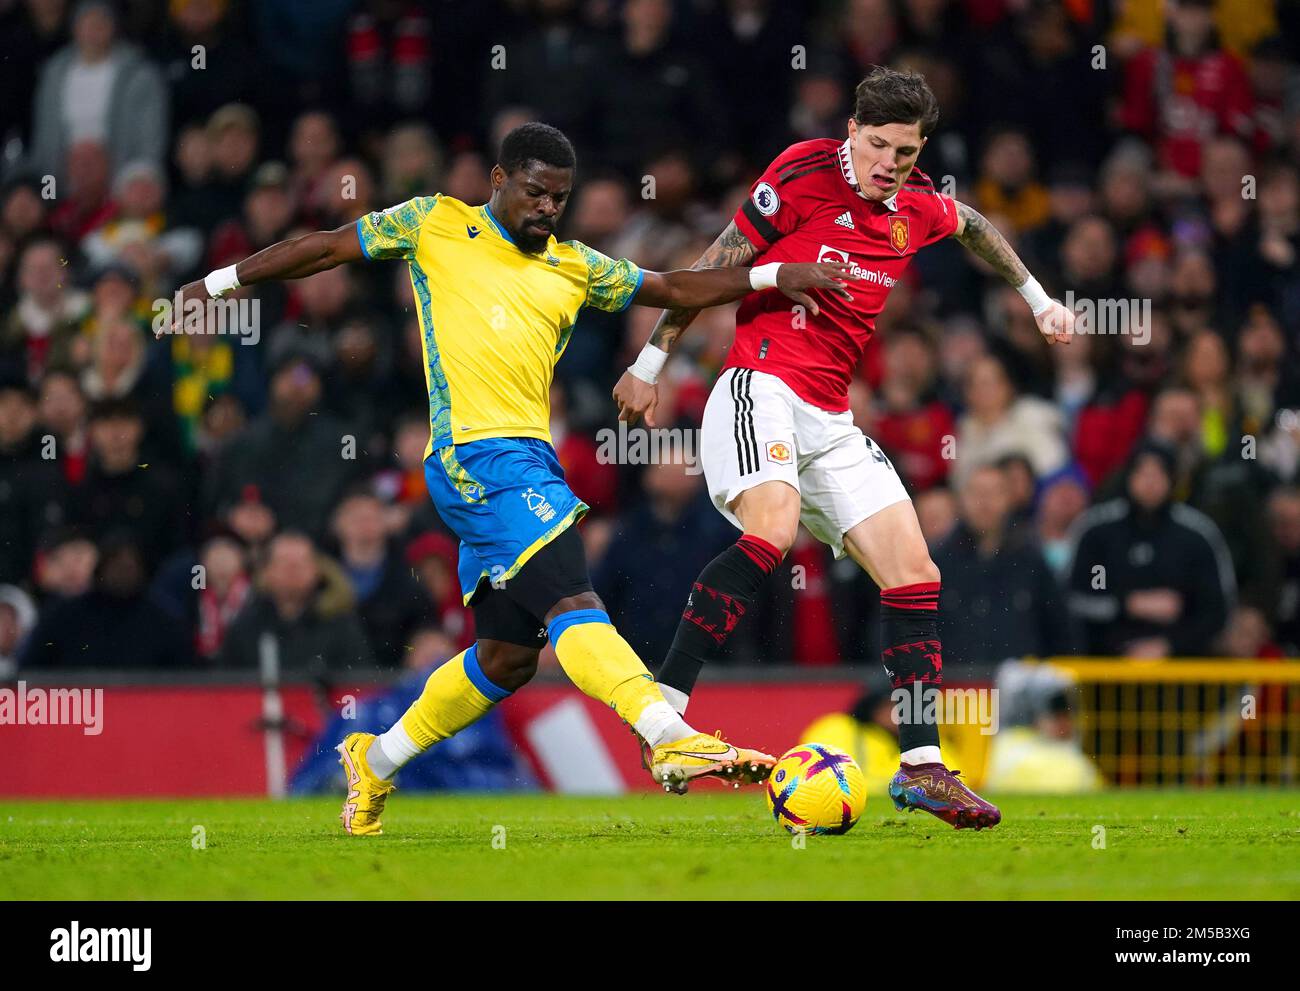 Nottingham Forest's Serge Aurier (left) and Manchester United's Alejandro Garnacho battle for the ball during the Premier League match at Old Trafford, Manchester. Picture date: Tuesday December 27, 2022. Stock Photo